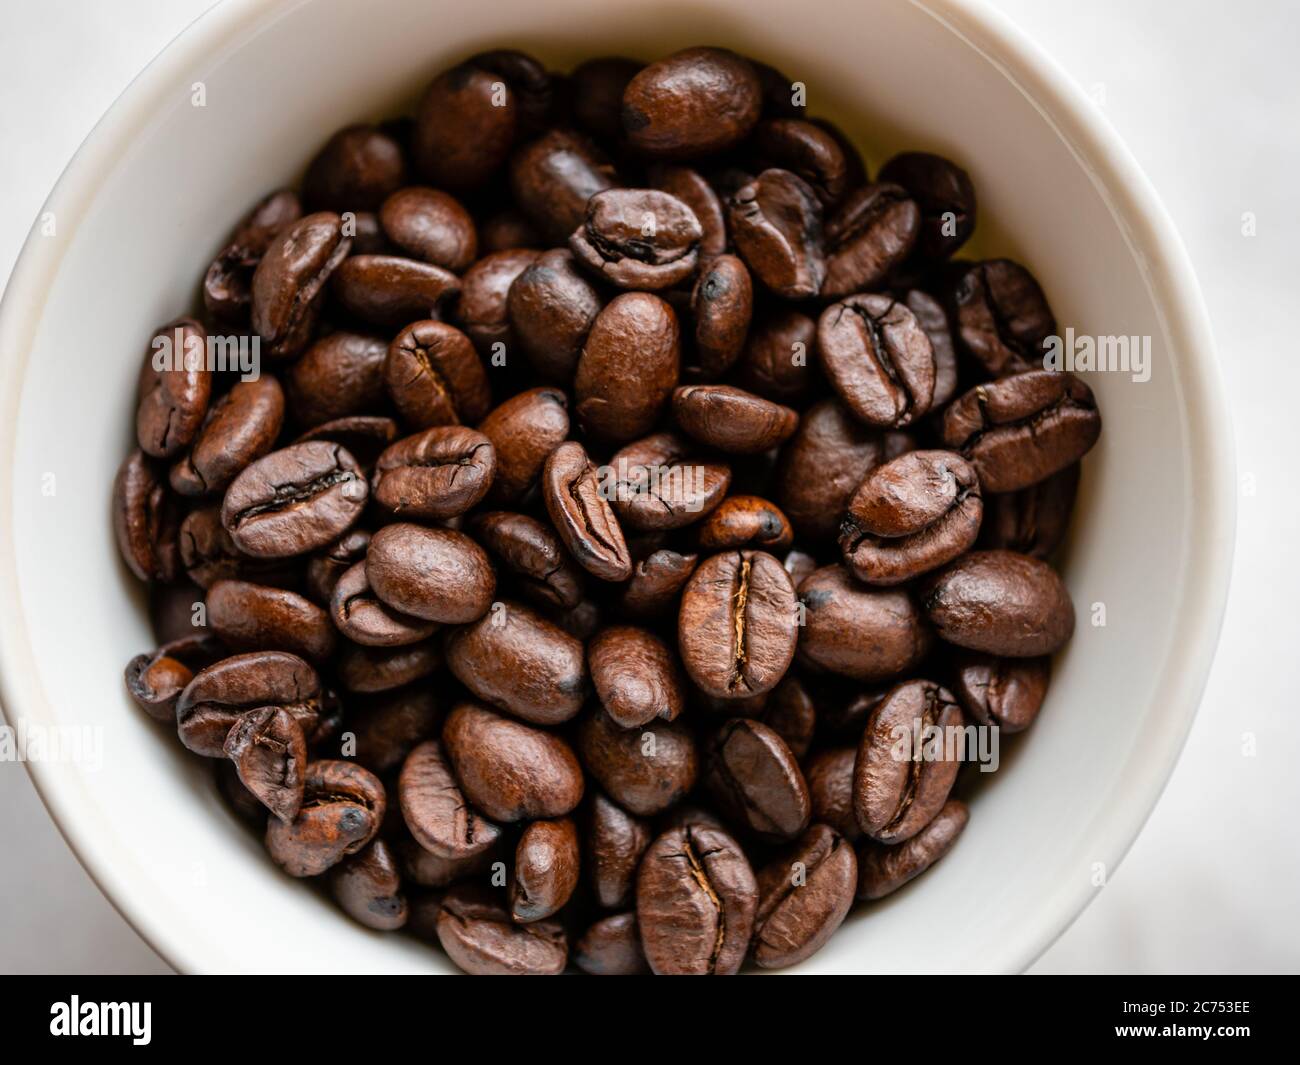 Macro close-up of roasted coffee beans in a white cup against a white background Stock Photo